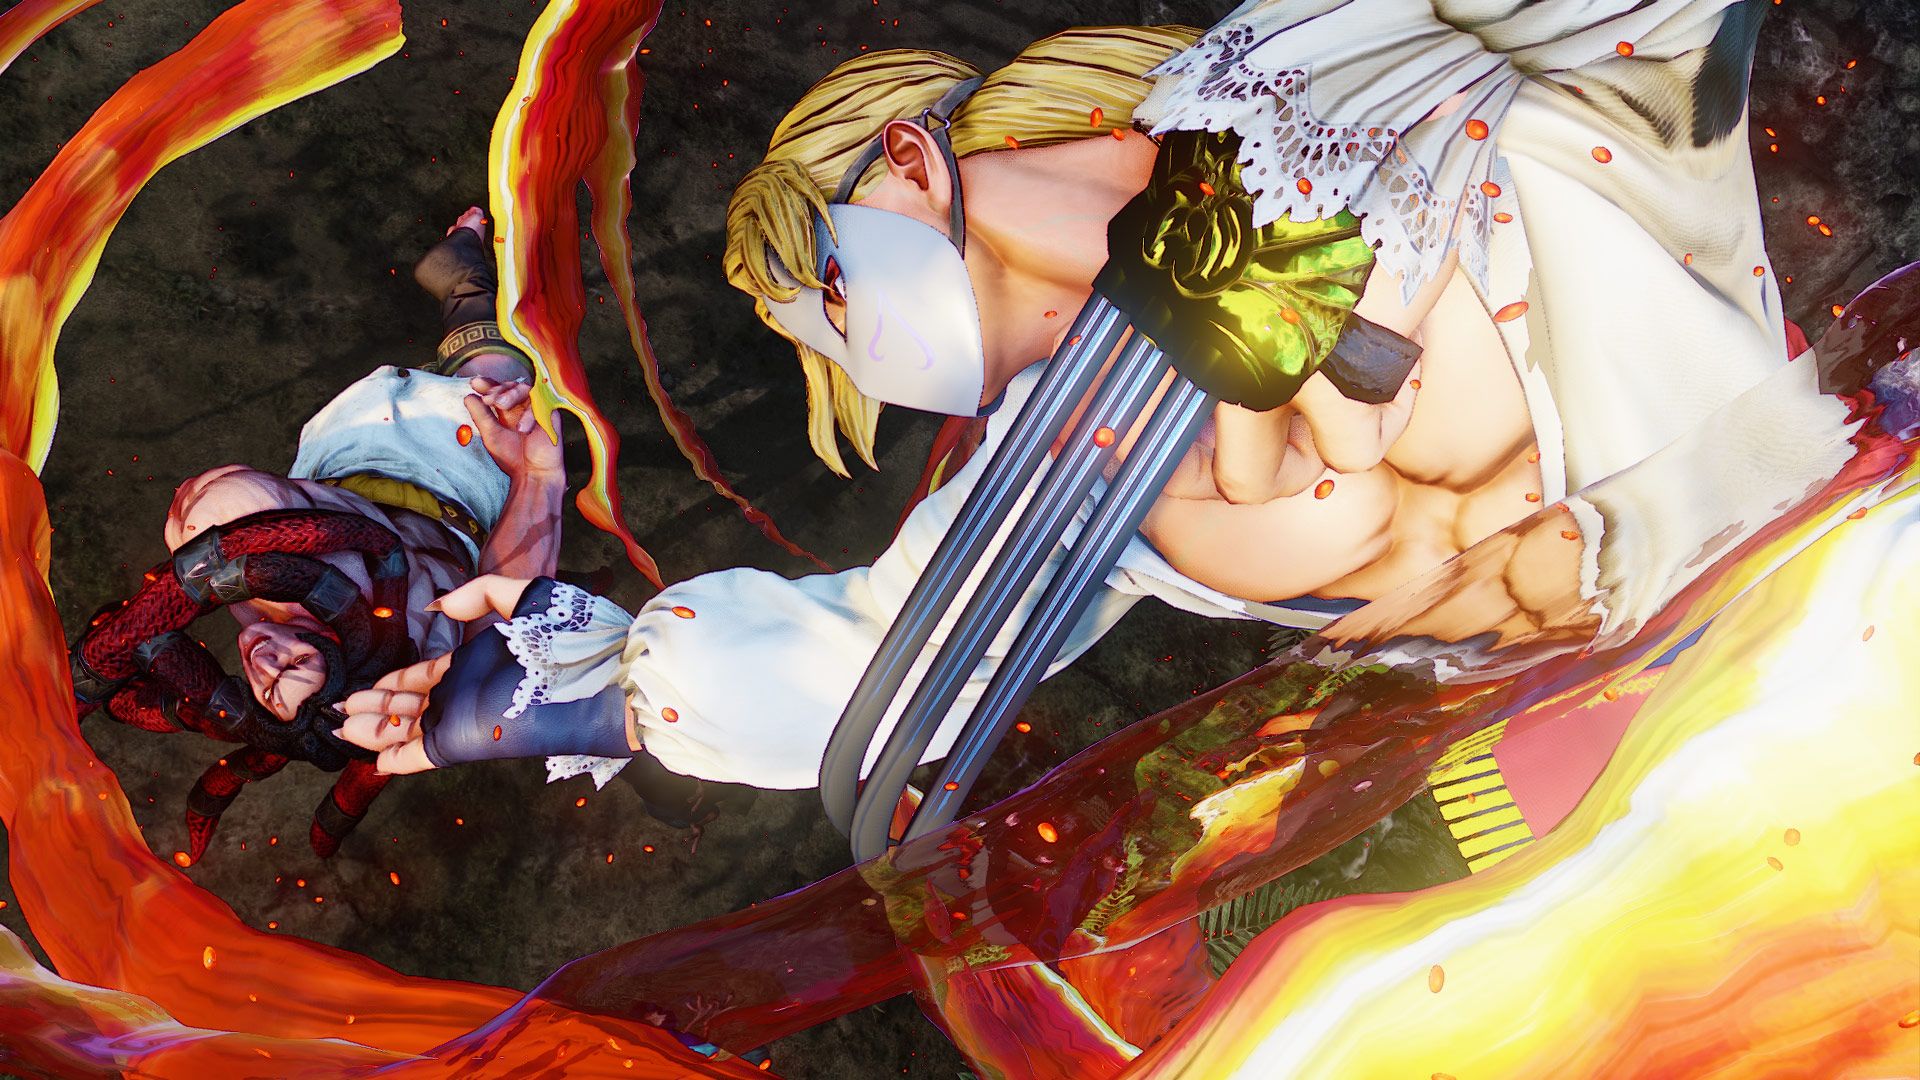 Vega revealed in Street Fighter 5 12 out of 15 image gallery